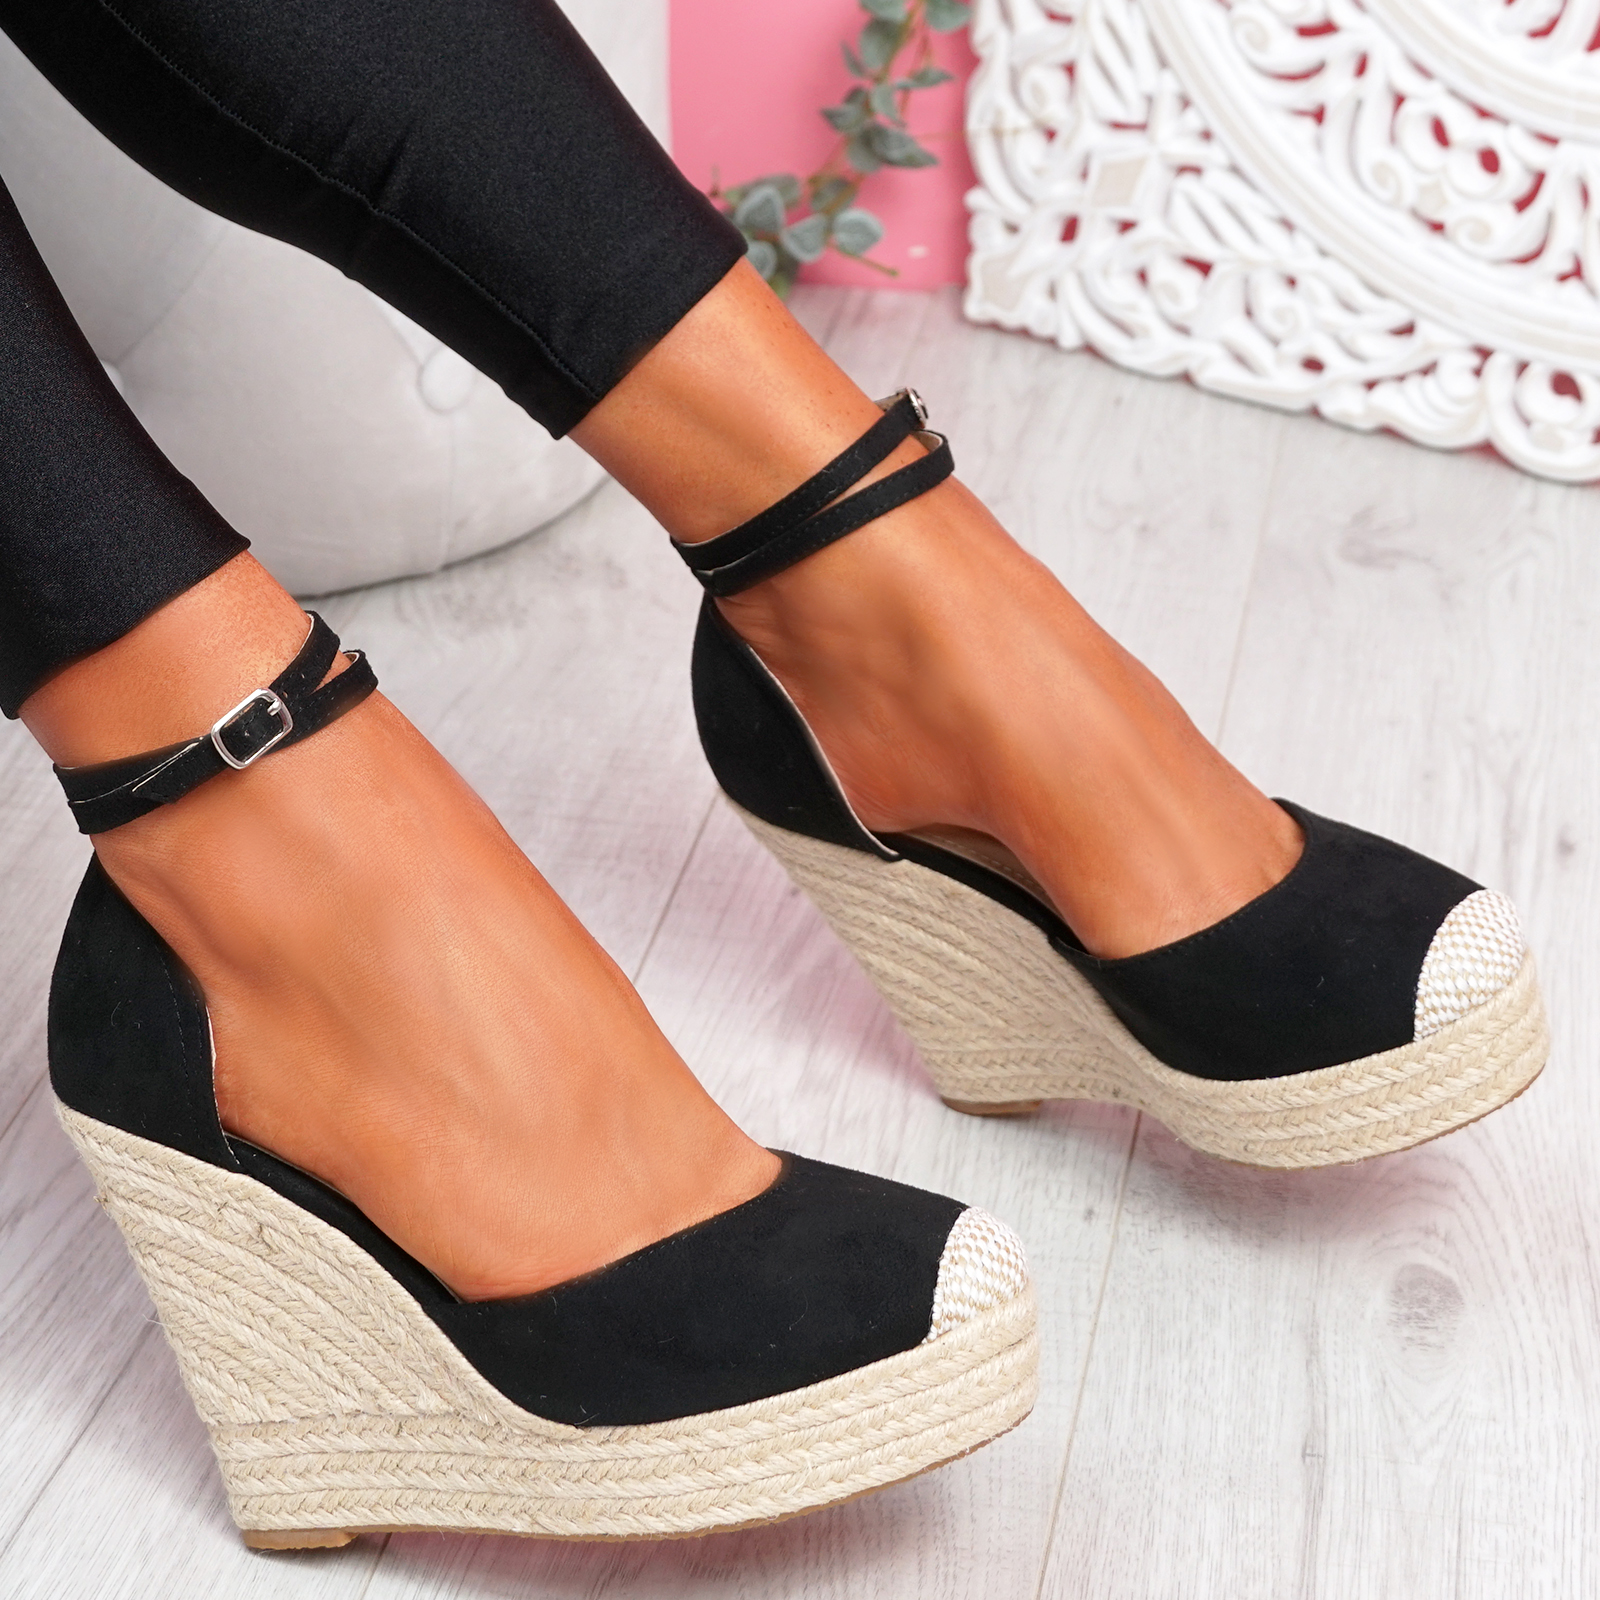 WOMENS LADIES HIGH FASHION WEDGE SANDALS ANKLE STRAP PLATFORM SHOES SIZE 3-8